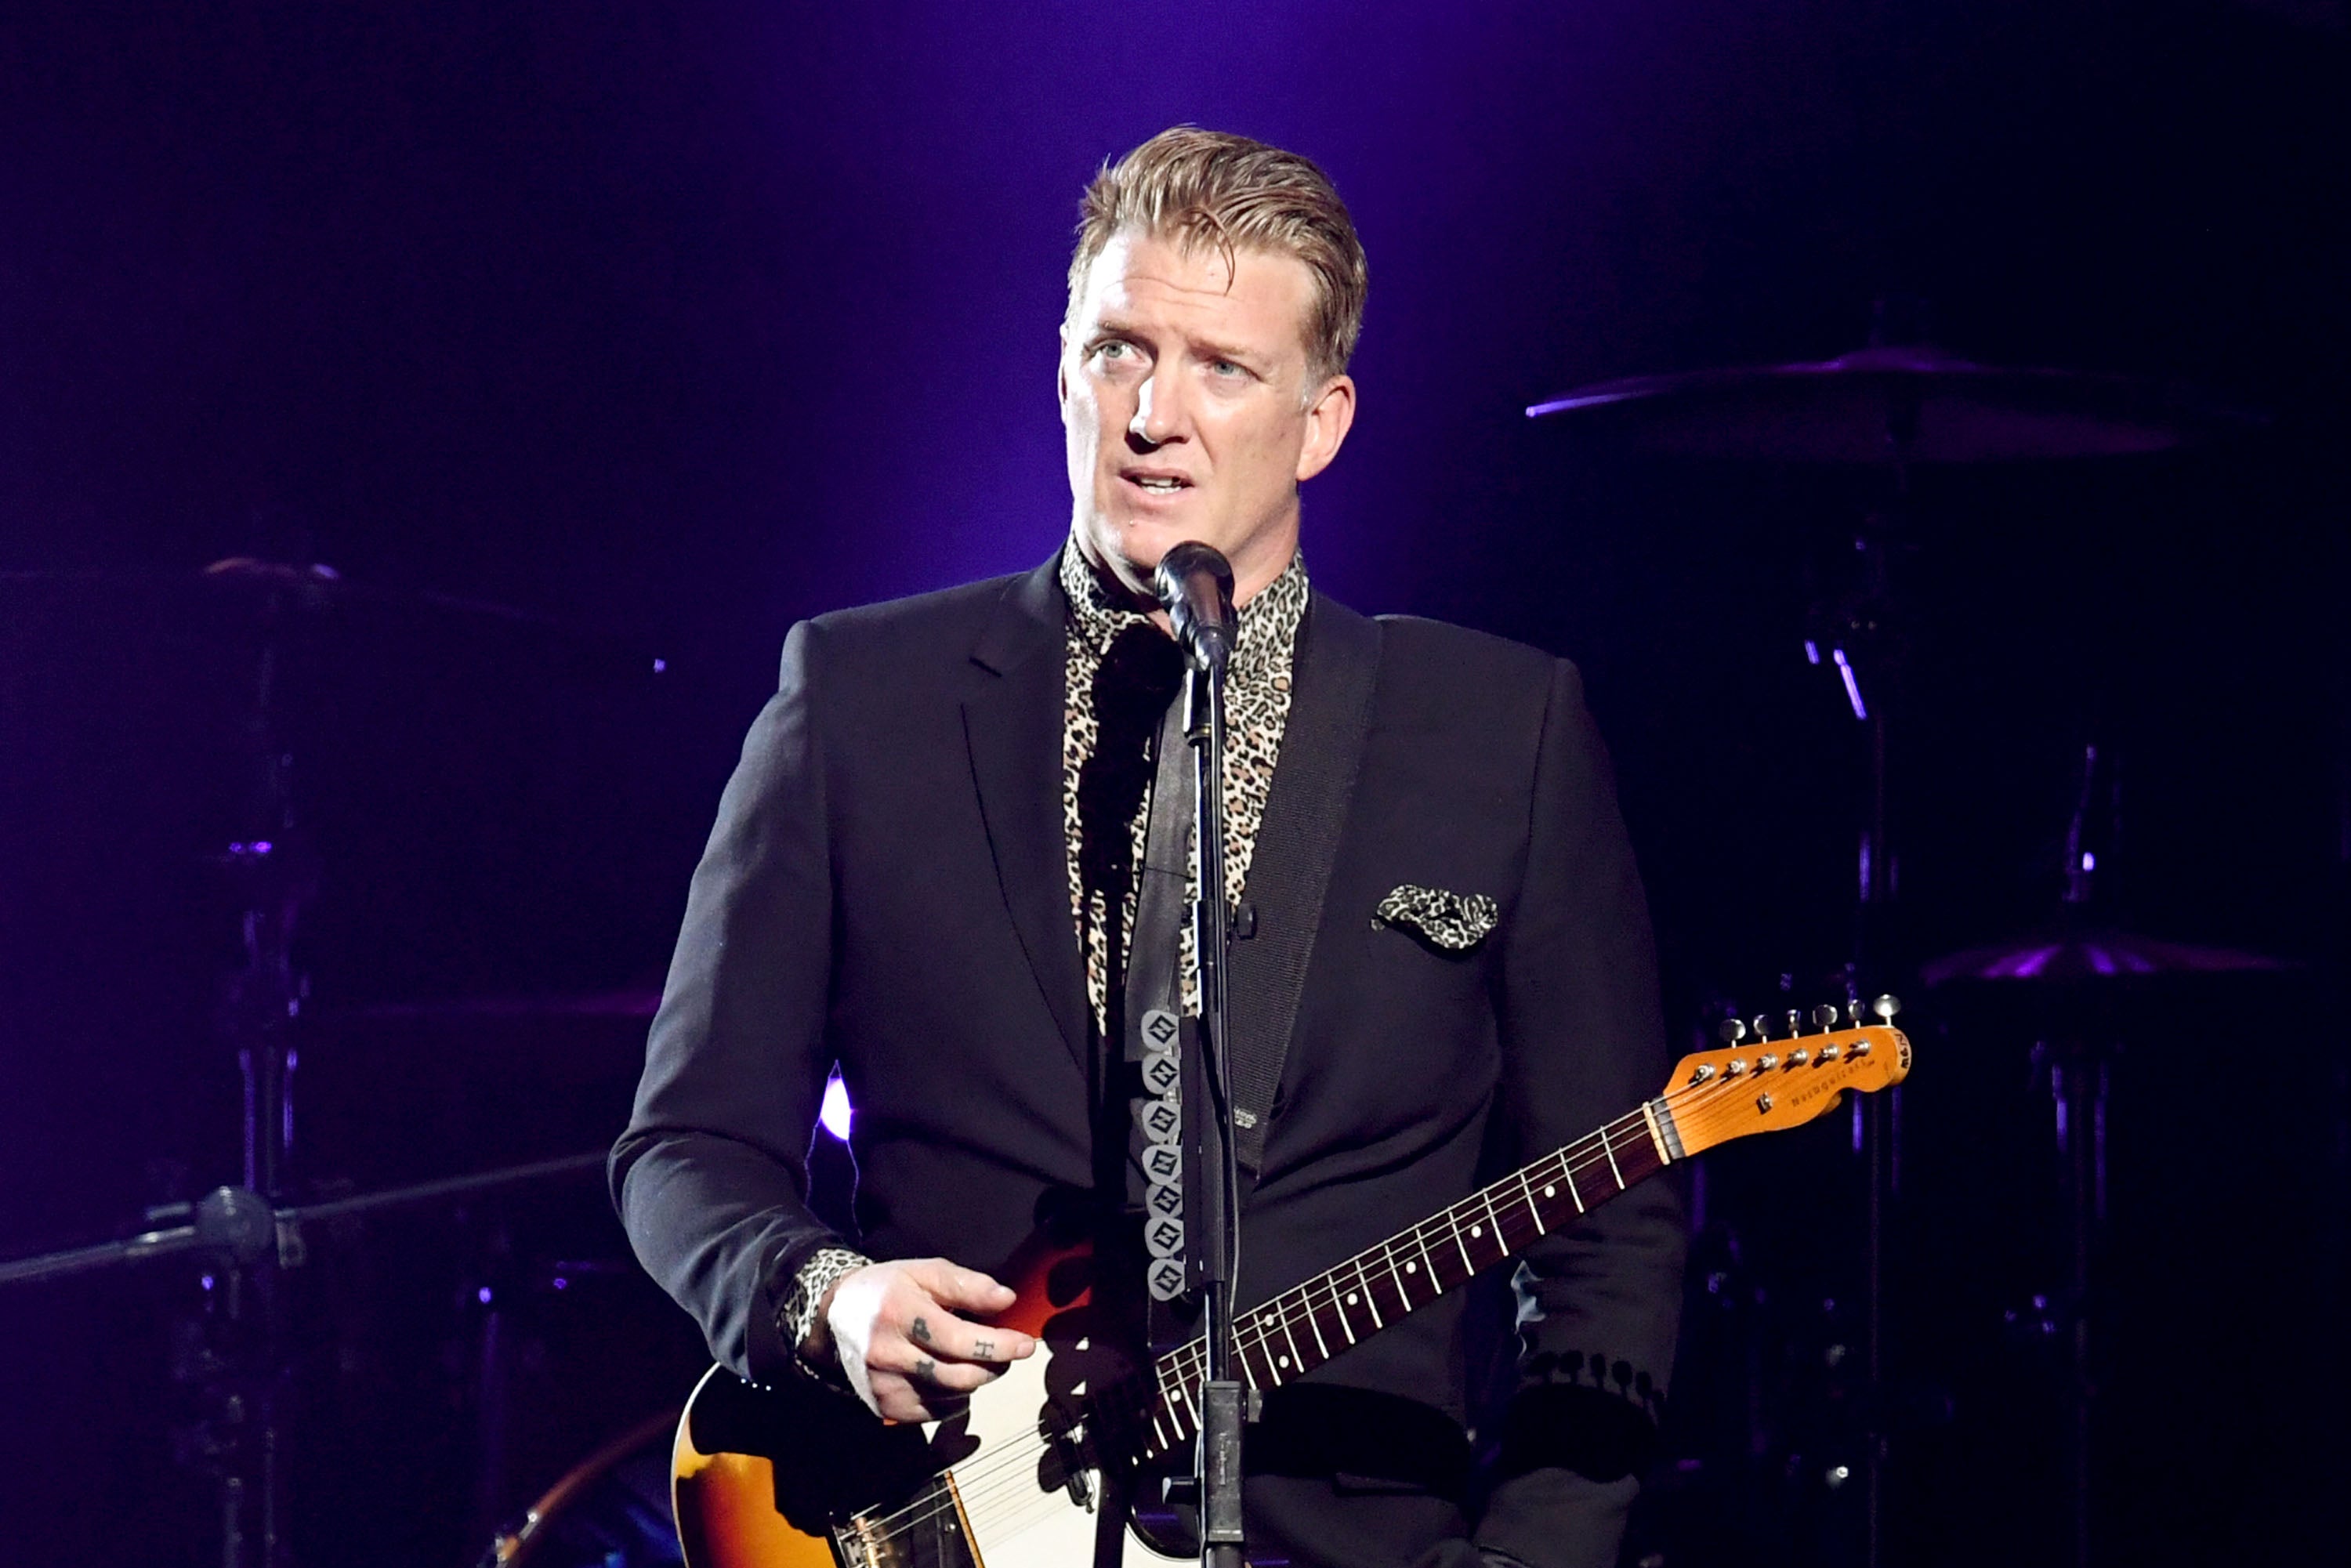 Josh Homme of Queens of the Stone Age performing in California in 2019